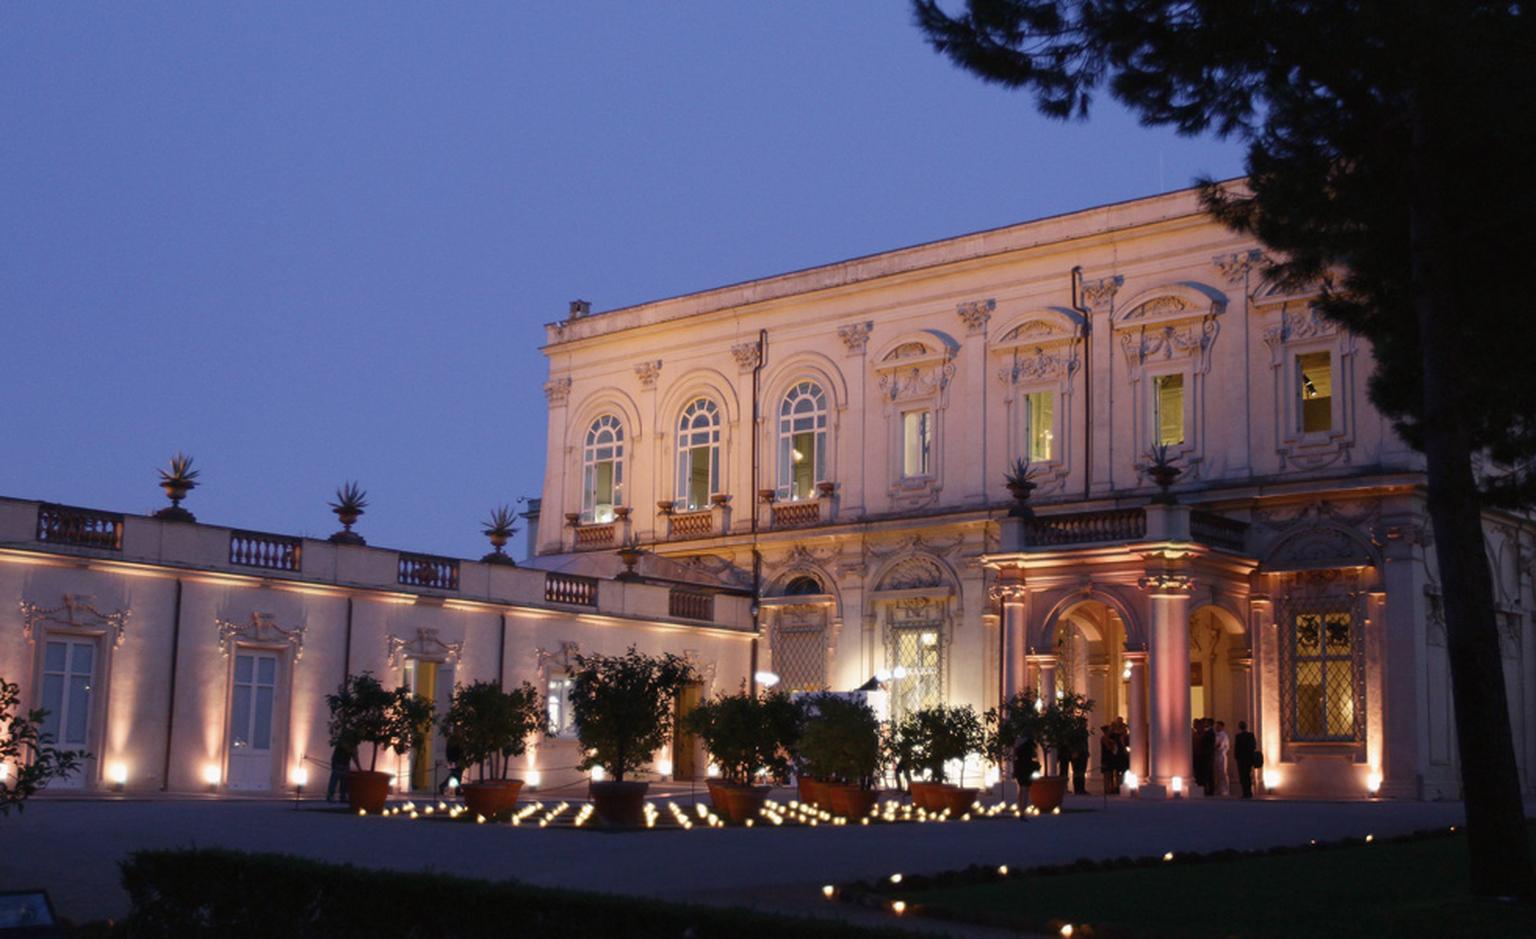 Cartier chose the Villa Aurelia in Rome to present the jewellery collection Sortilège that is inspired by fragrances.